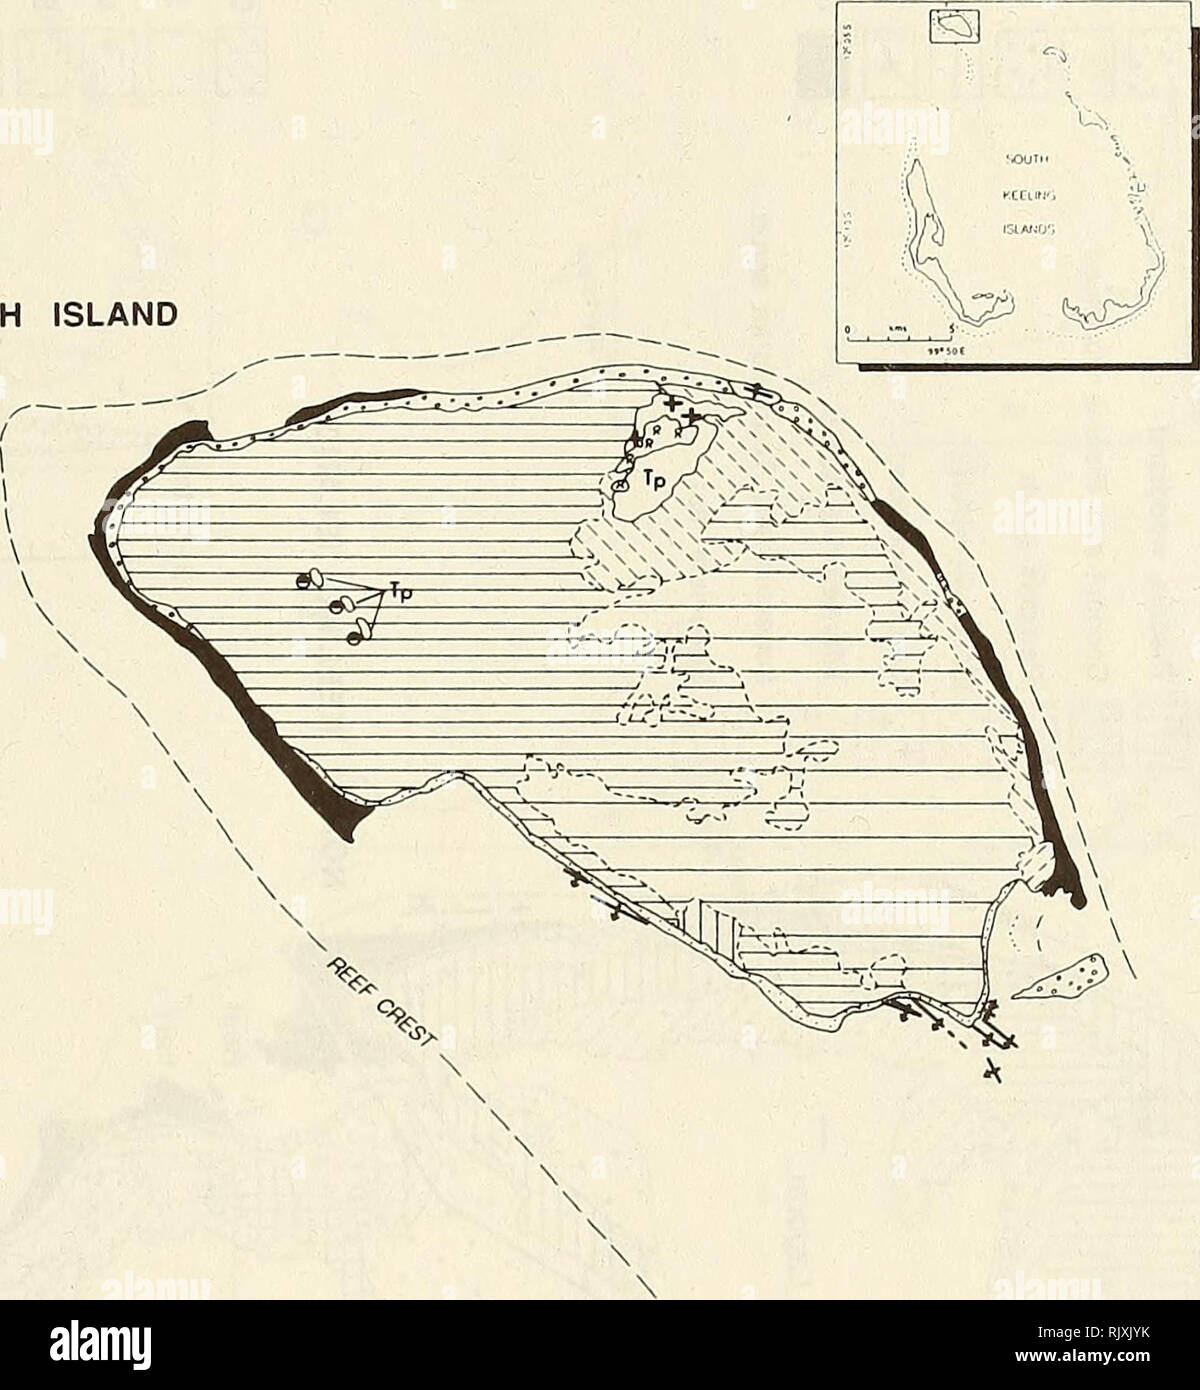 . Atoll research bulletin. Coral reefs and islands; Marine biology; Marine sciences. 25 HORSBURGH ISLAND 7] Sand I'. â .'â ! Sand and shingle p5&lt;71 Beachrock I Conglomerate platform I tp I Tidal pool ] Open coconut woodland FzIj Coconut woodland [1 Calophyllum woodland | + + | Cordia woodland I * ol Cordia stumps |*Â« *| Rhizophora /'/ Pemphis scrub [s Scaevola scrub. 0 500 metres I i i i i i Figure 9. Horsburgh Island, mapped from 1987 aerial photography.. Please note that these images are extracted from scanned page images that may have been digitally enhanced for readability - color Stock Photo